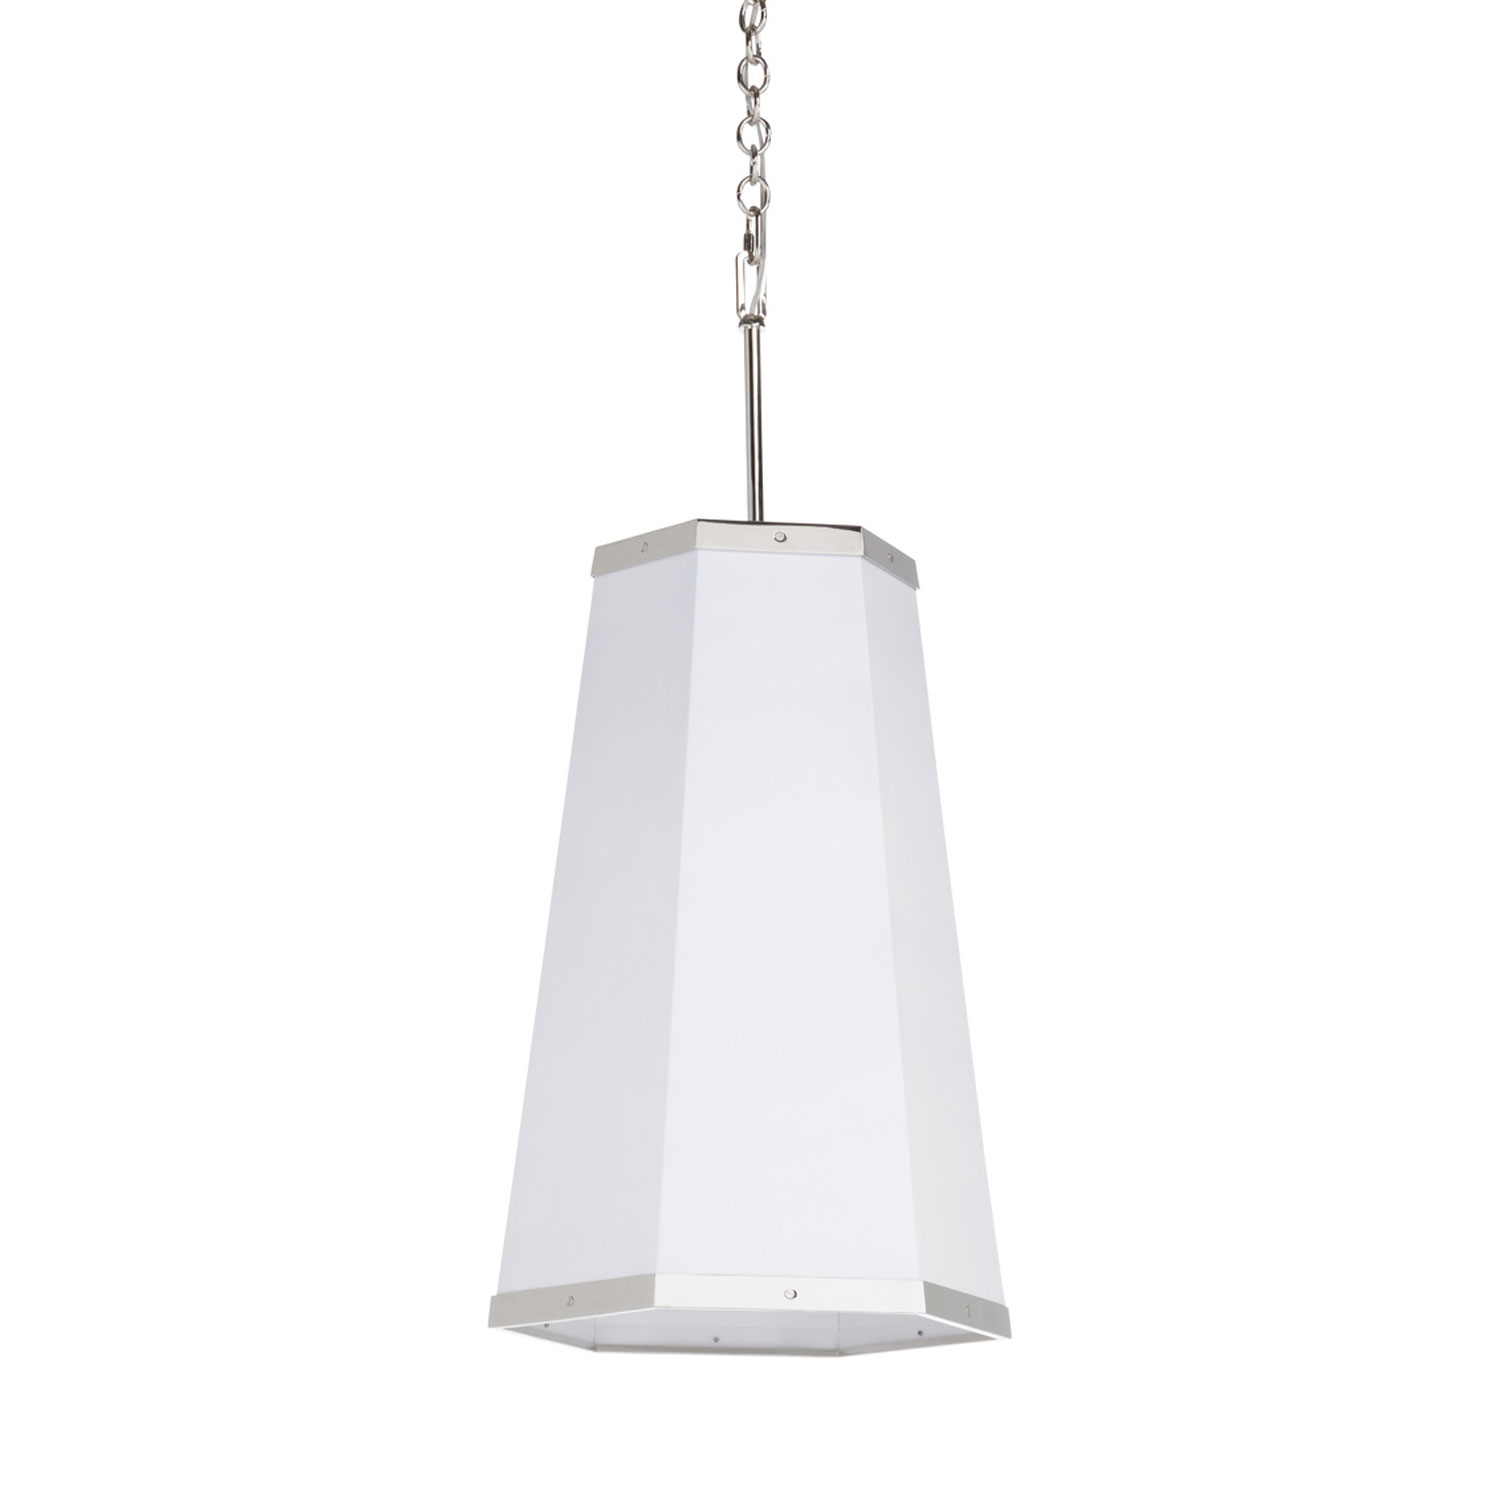 High Street Polished Nickel And White Hexagon Pendant